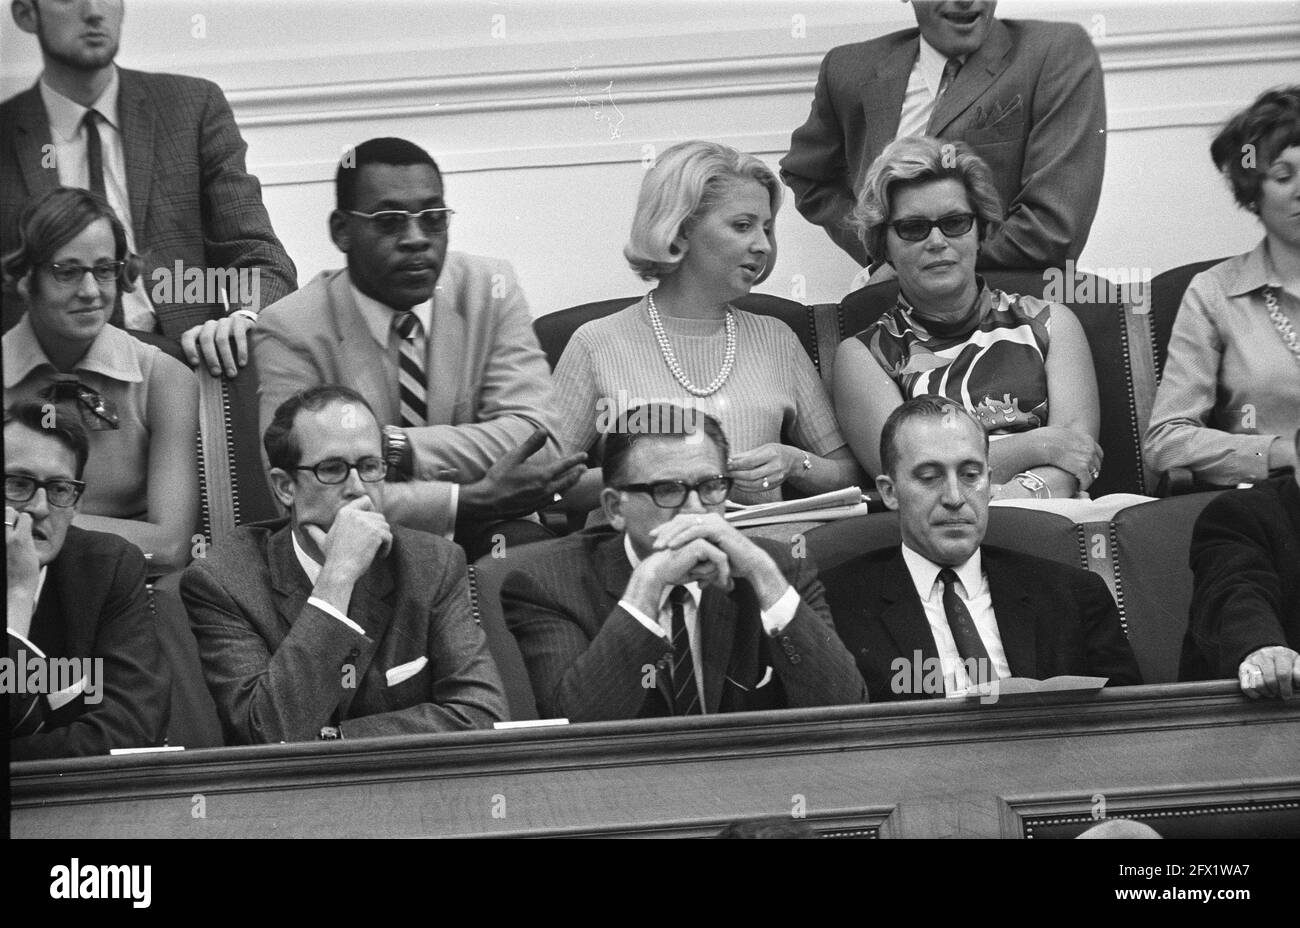 Verolme issue in House of Representatives by interpellation drs. Nederhorst . Family and direkte of Verolme on stand. Maingay, v.d.Meer and Schwenke, 25 September 1969, parliamentary debates, The Netherlands, 20th century press agency photo, news to remember, documentary, historic photography 1945-1990, visual stories, human history of the Twentieth Century, capturing moments in time Stock Photo